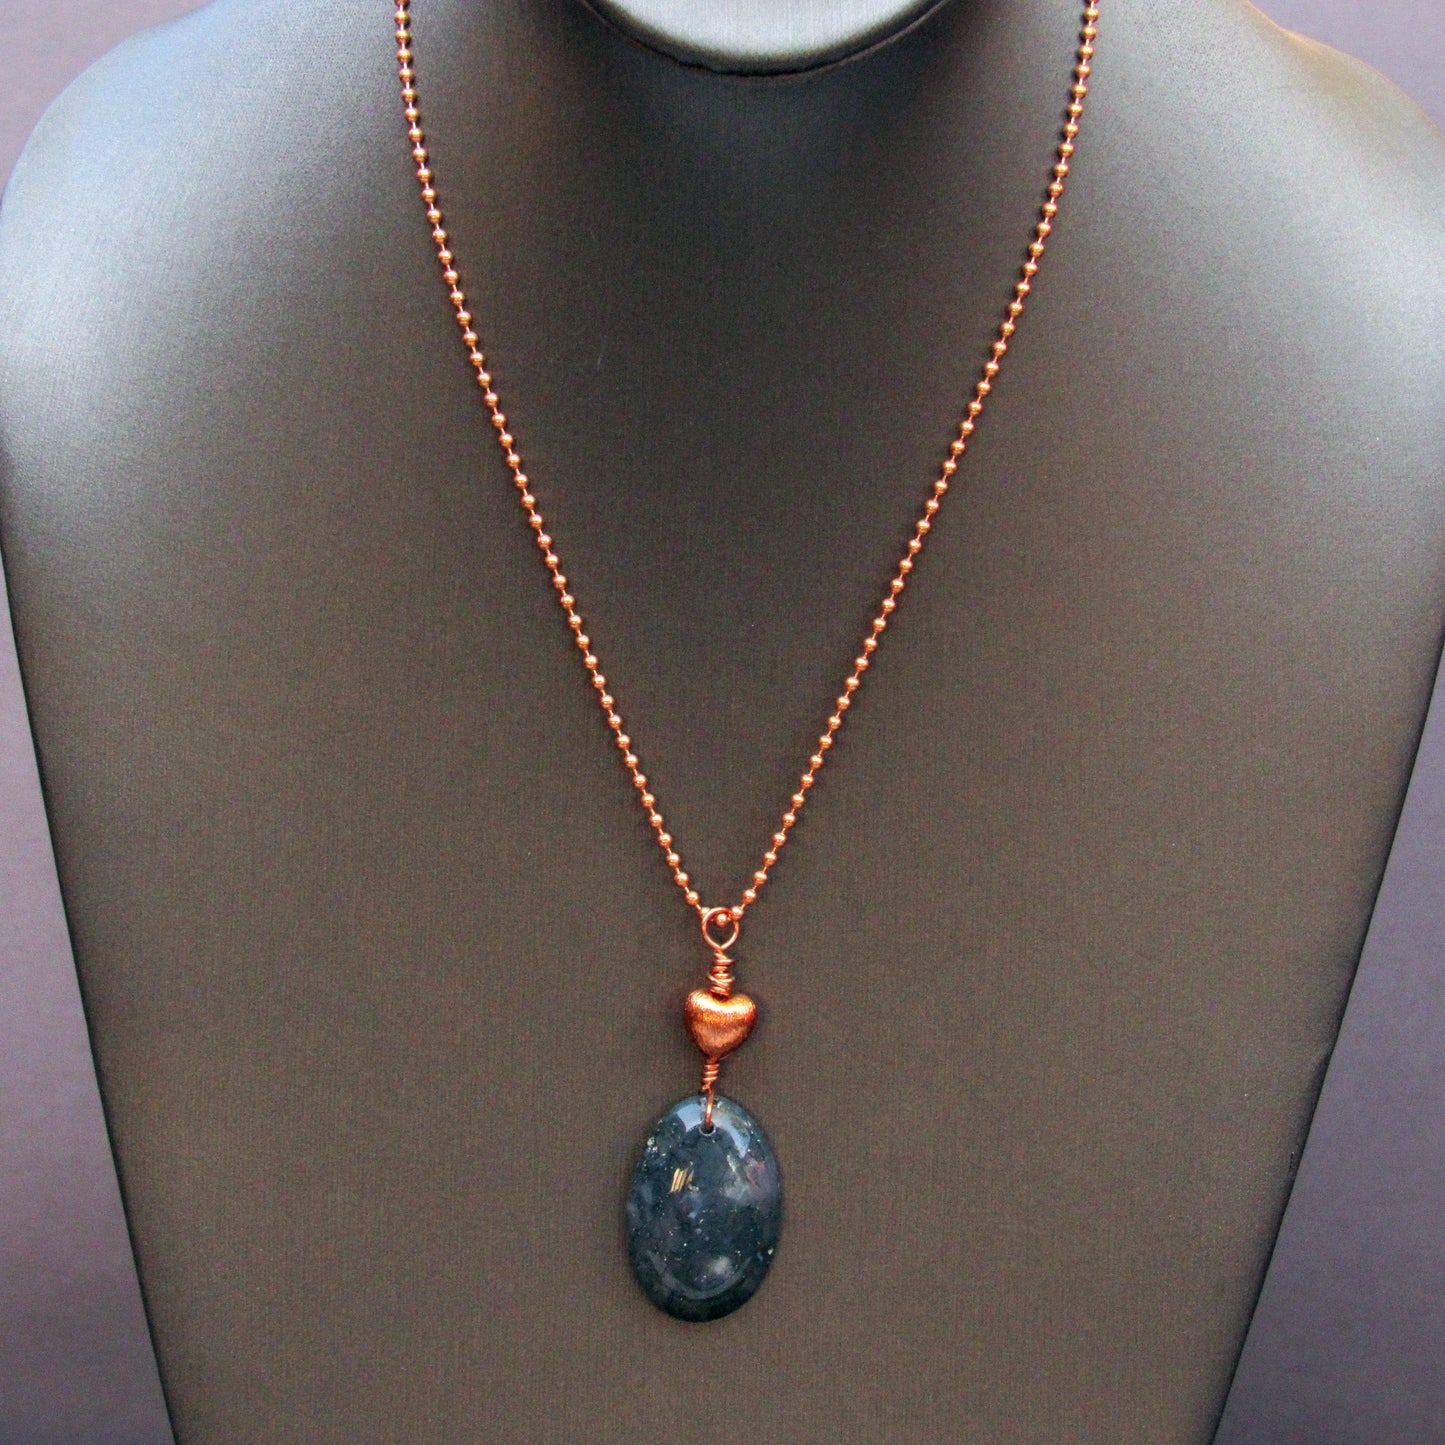 Moss Agate Gemstone Pendant on Copper chain necklace